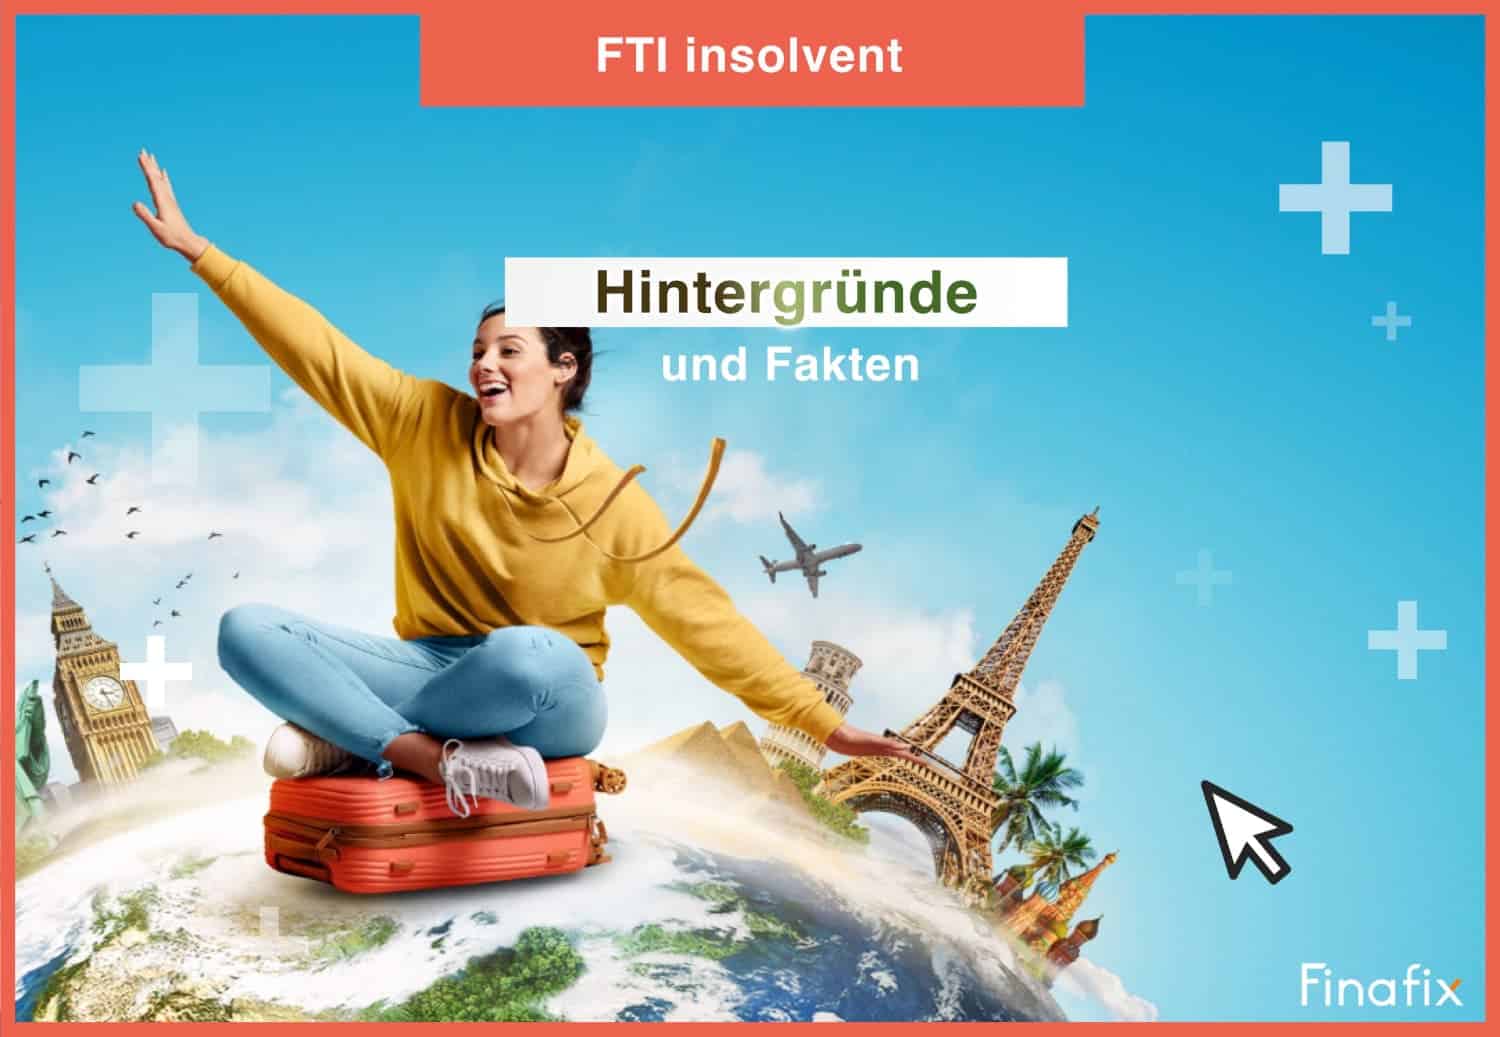 FTI insolvent